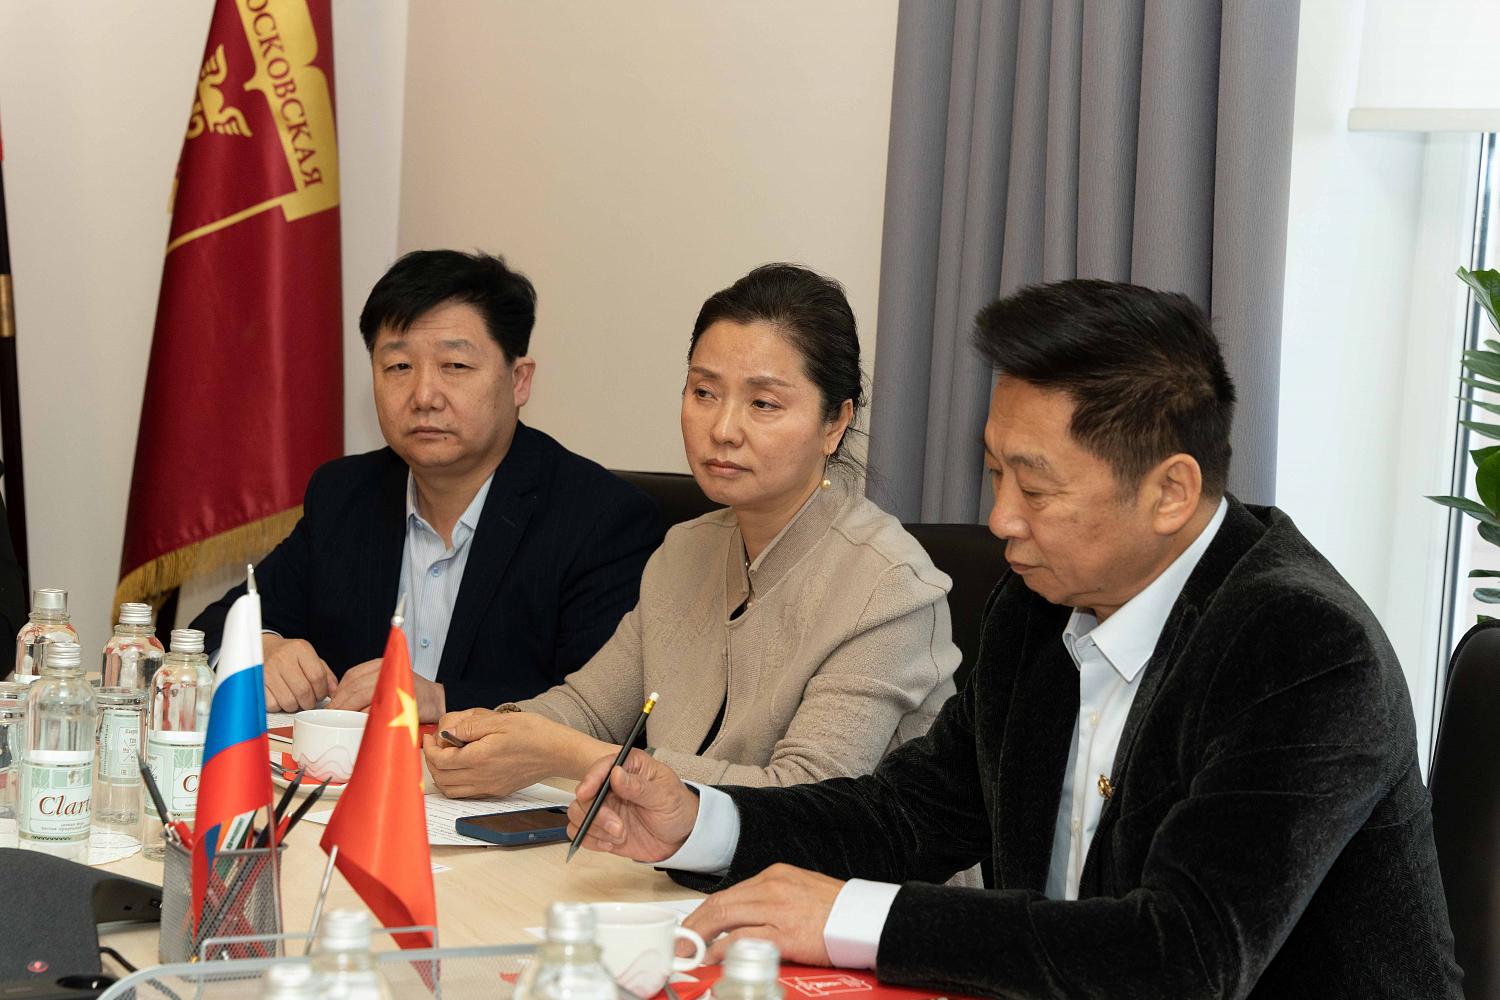 A meeting with a business delegation of Chinese entrepreneurs took place at the Moscow Chamber of Commerce and Industry